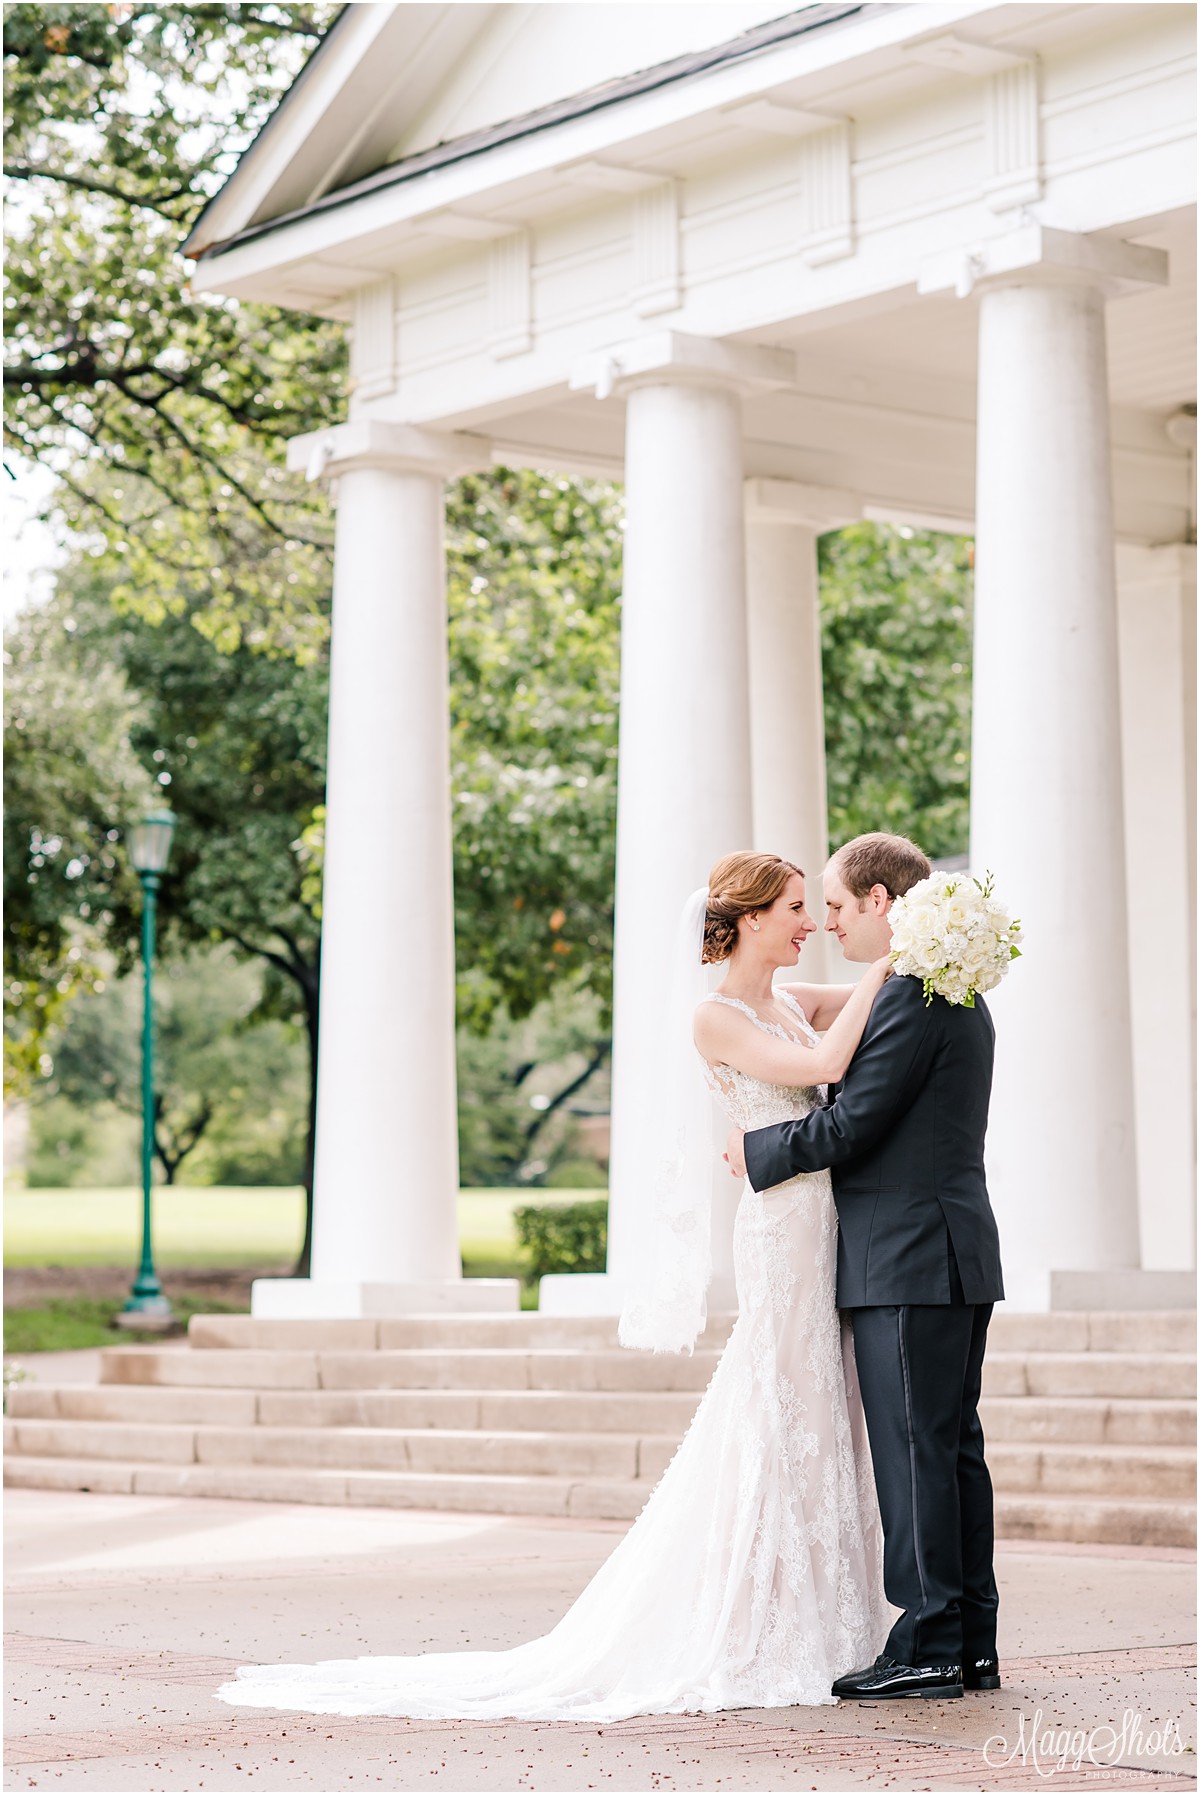 MaggShots Photography, DFW Wedding Photographer, HPUMC Wedding Photographer, HPUMC, Wedding Photographer, Dallas wedding, HPUMC Wedding, Arlington Hall, Arlington Hall Wedding, Arlington Hall Wedding Photographer, first look, bride & groom portraits